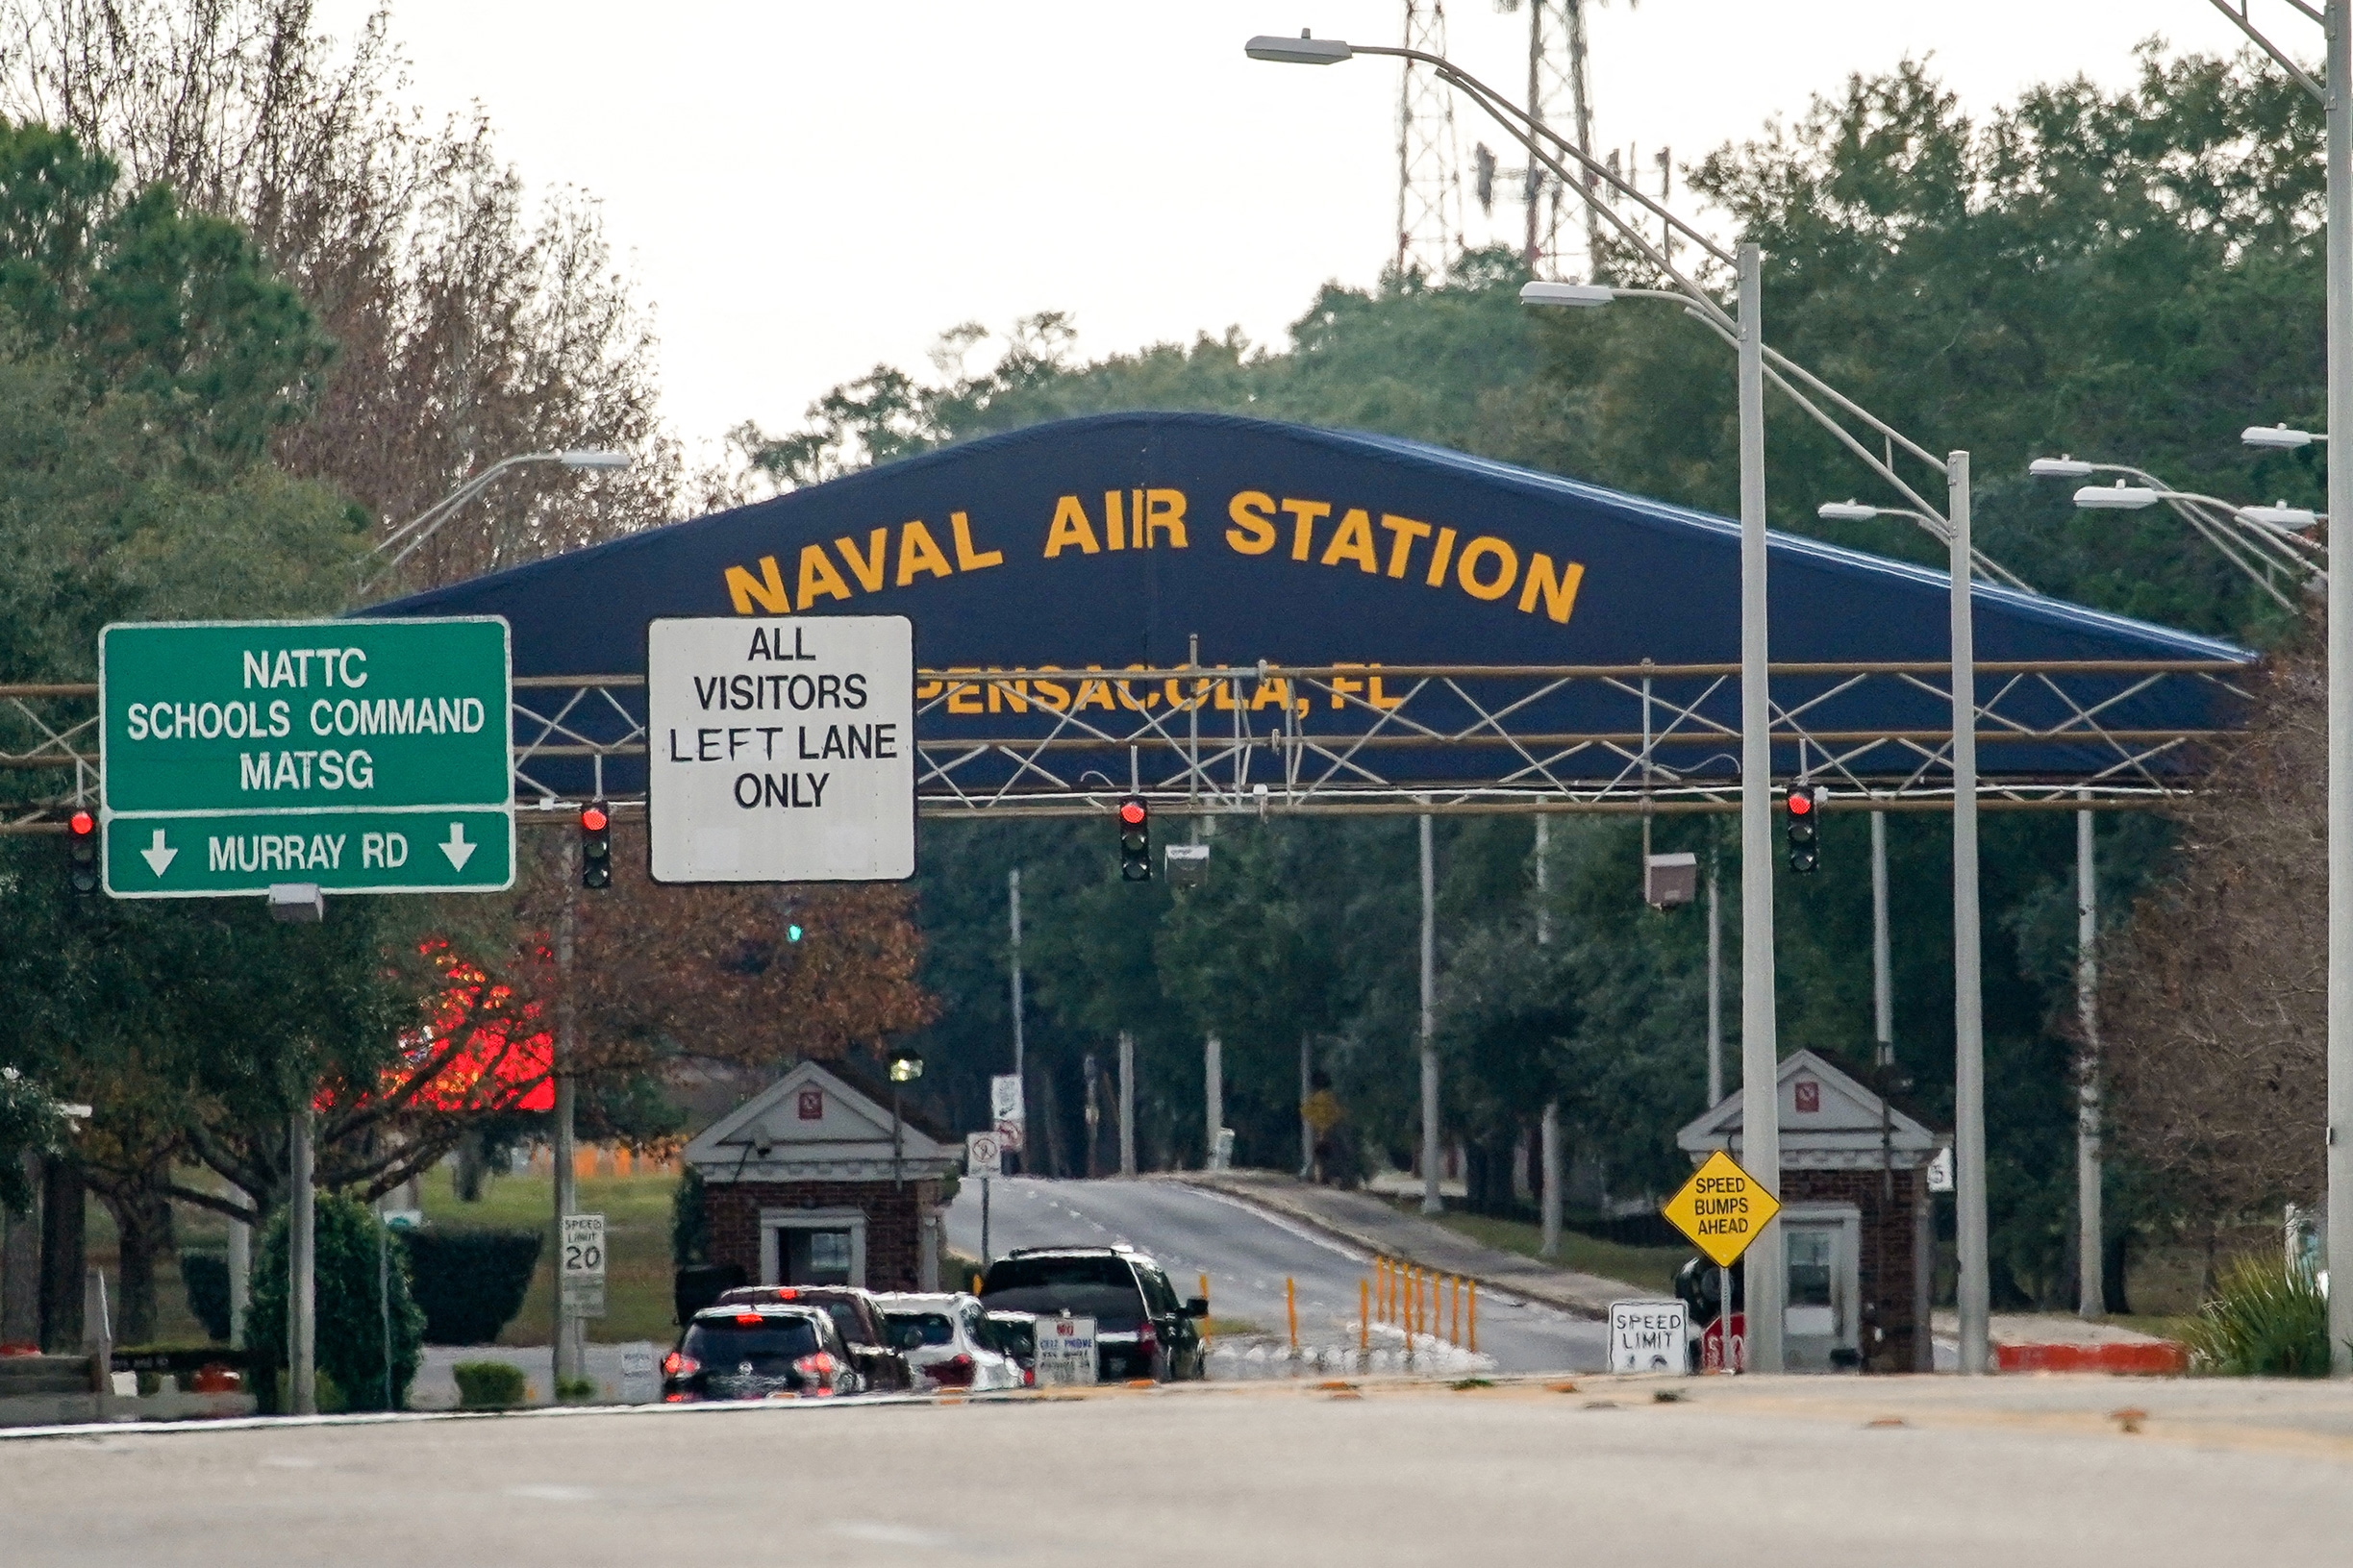 The lawsuit centers around the December 2019 shooting at Naval Air Station Pensacola, which left three US sailors dead.